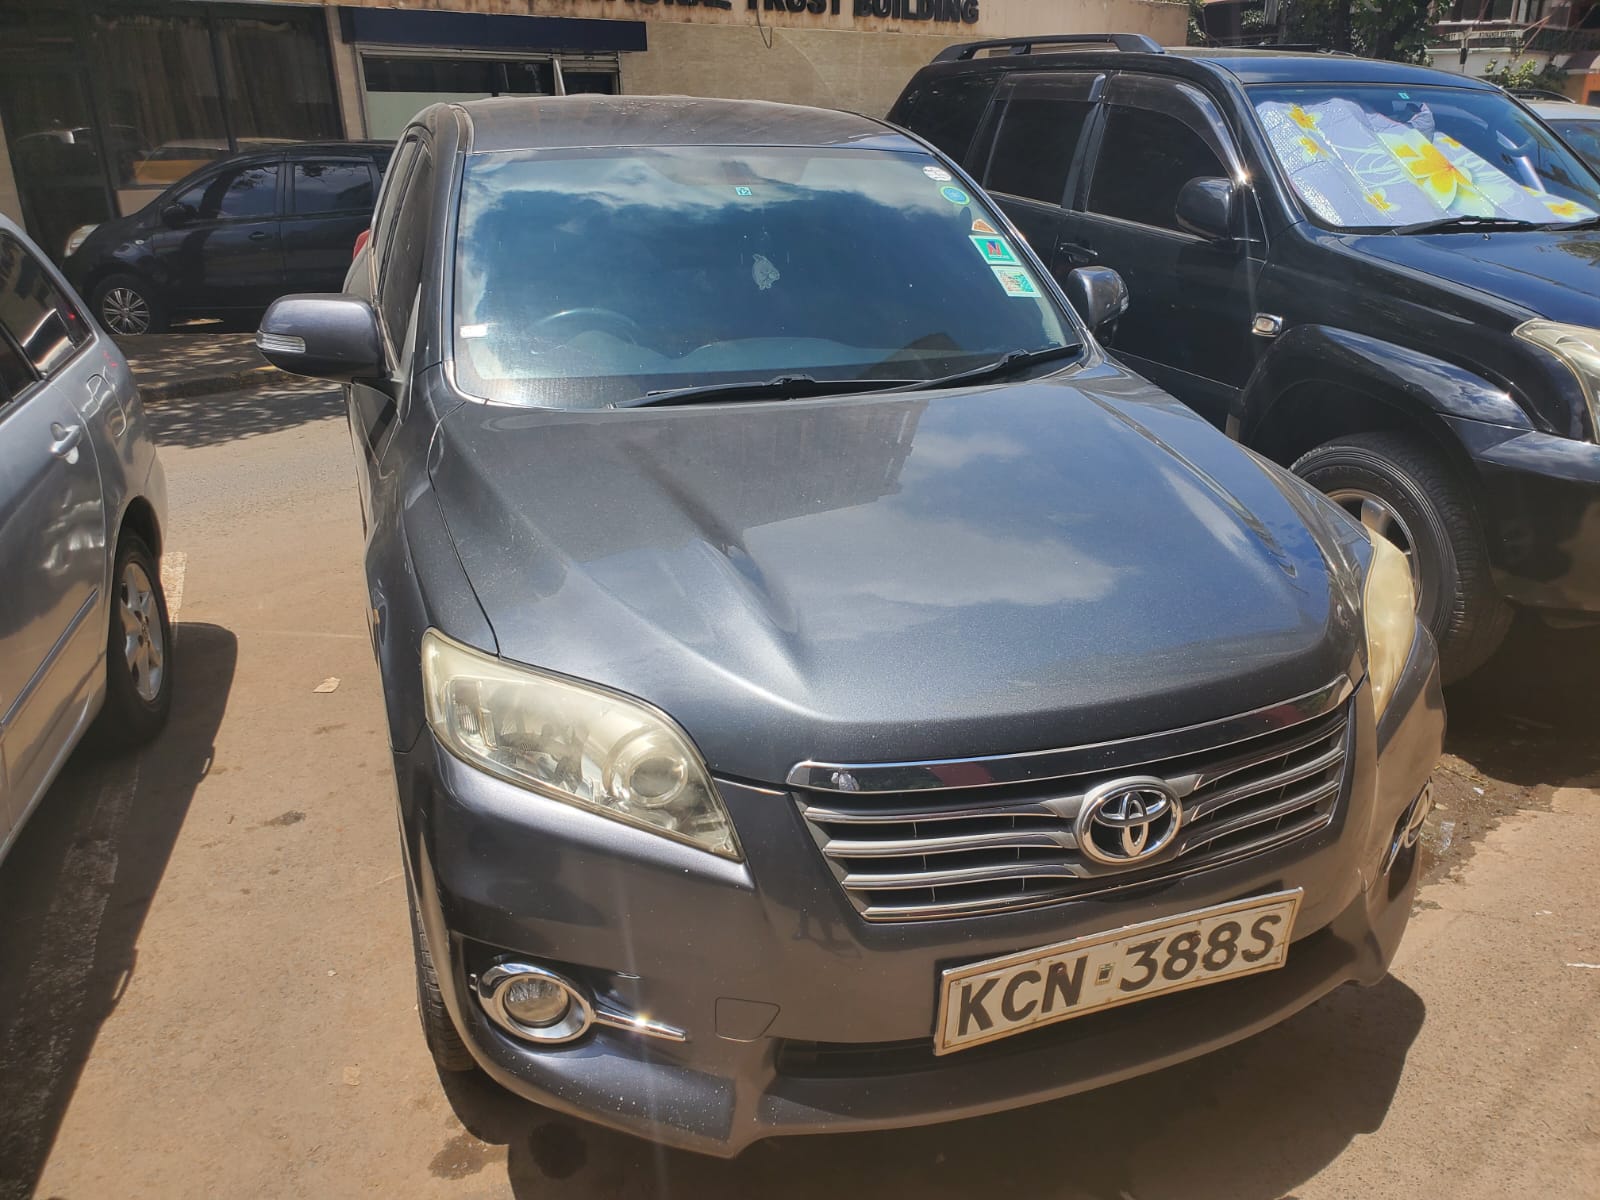 Toyota Vanguard 2010 You Pay 30% Deposit Trade in OK Wow